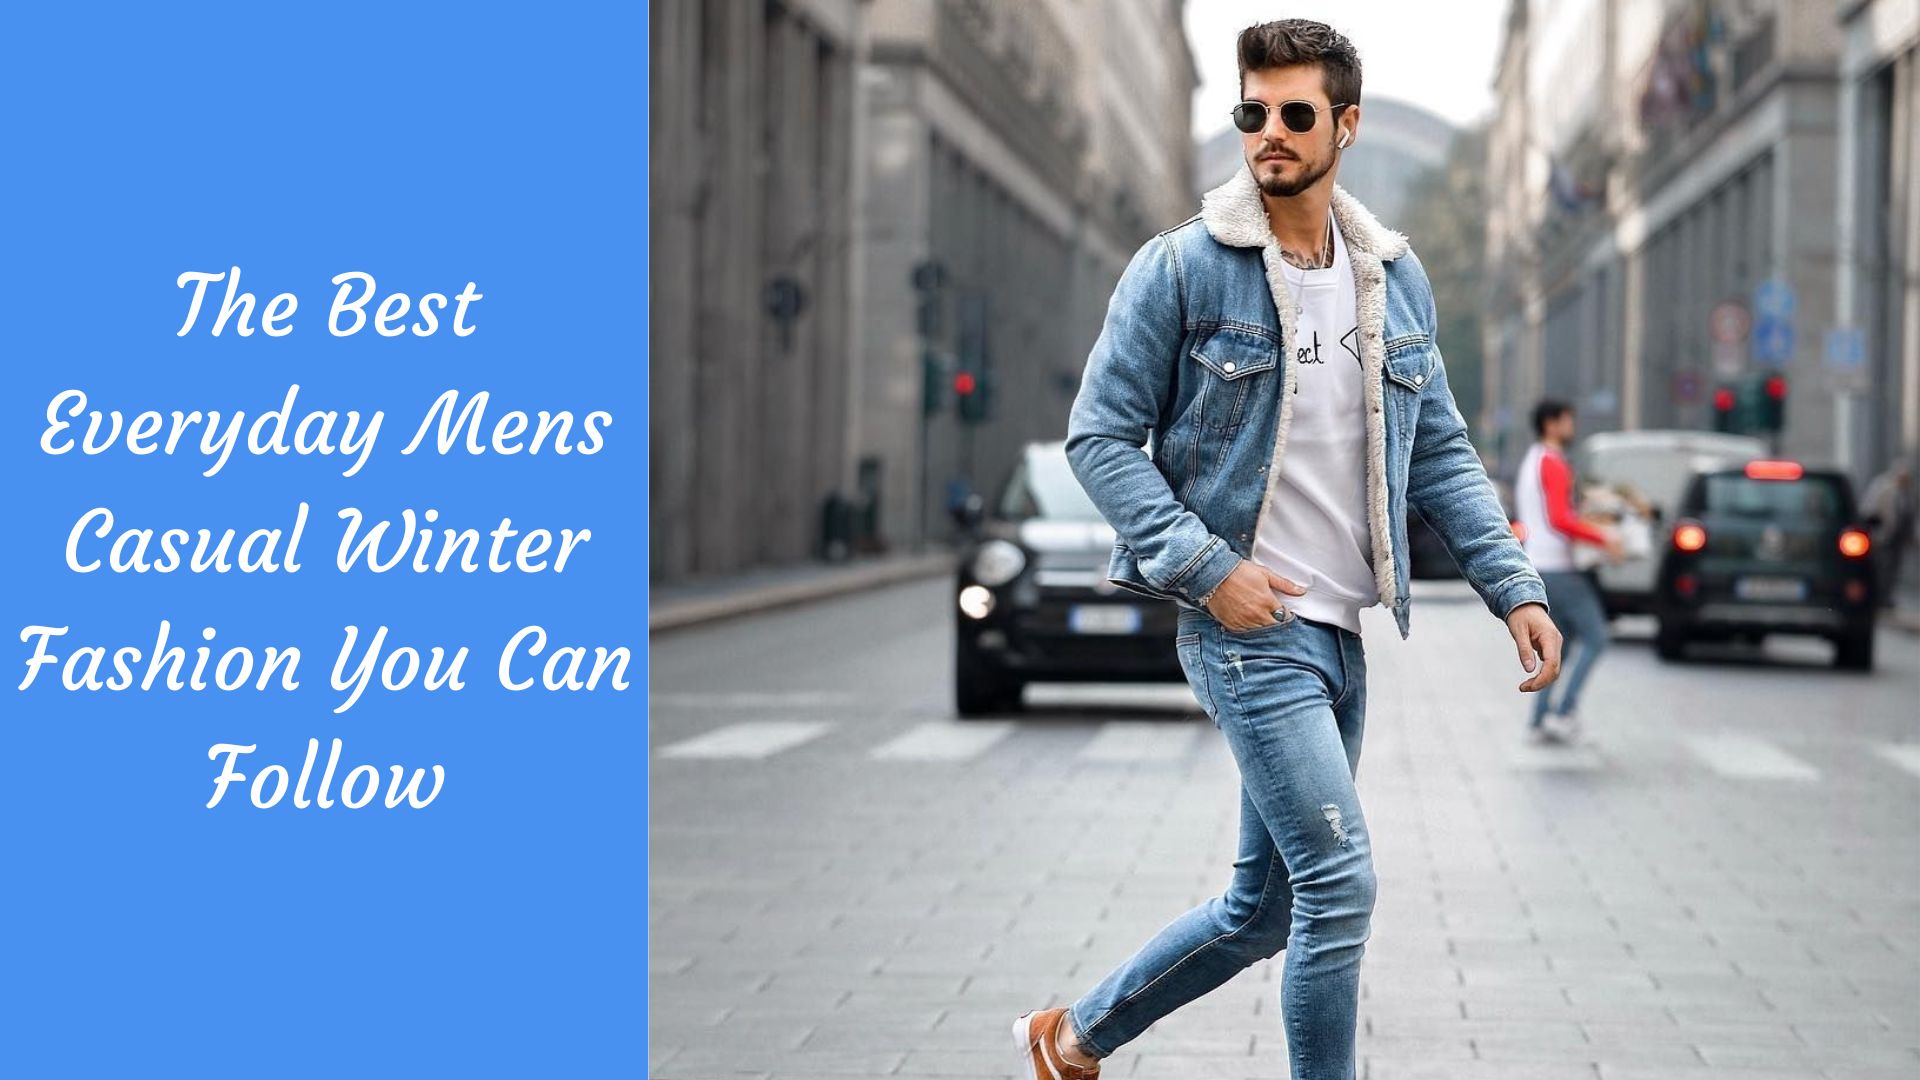 The Best Everyday Mens Casual Winter Fashion You Can Follow - The Kosha  Journal